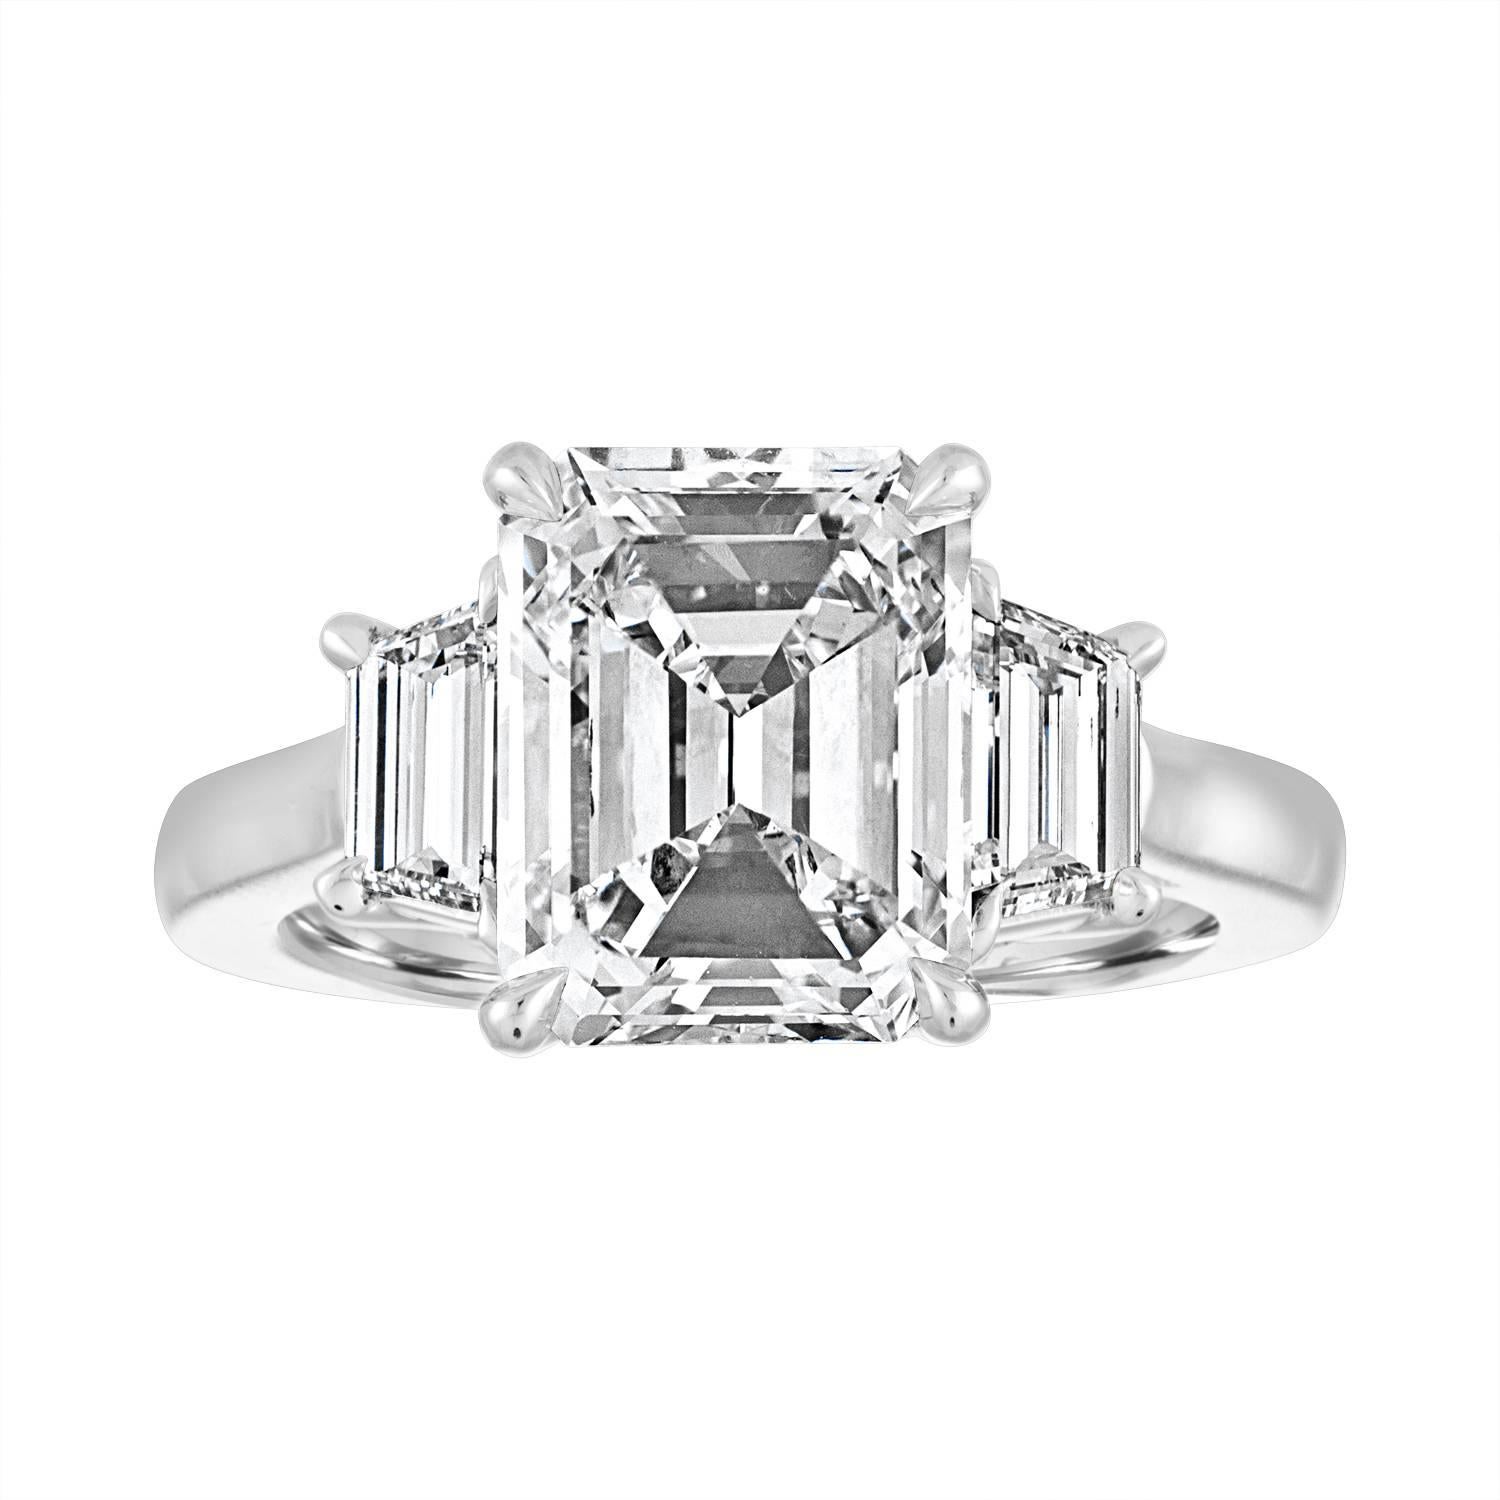 Certified 4.01 Carat Emerald Cut J in Color and SI2 in Clarity. The Center is set in Three Stone Ring. The Mounting is Hand Made Platinum Mounting.
The Step Cut Diamonds are 0.72 Carat Total Weight. 
The GIA certificate number is 6173839485.